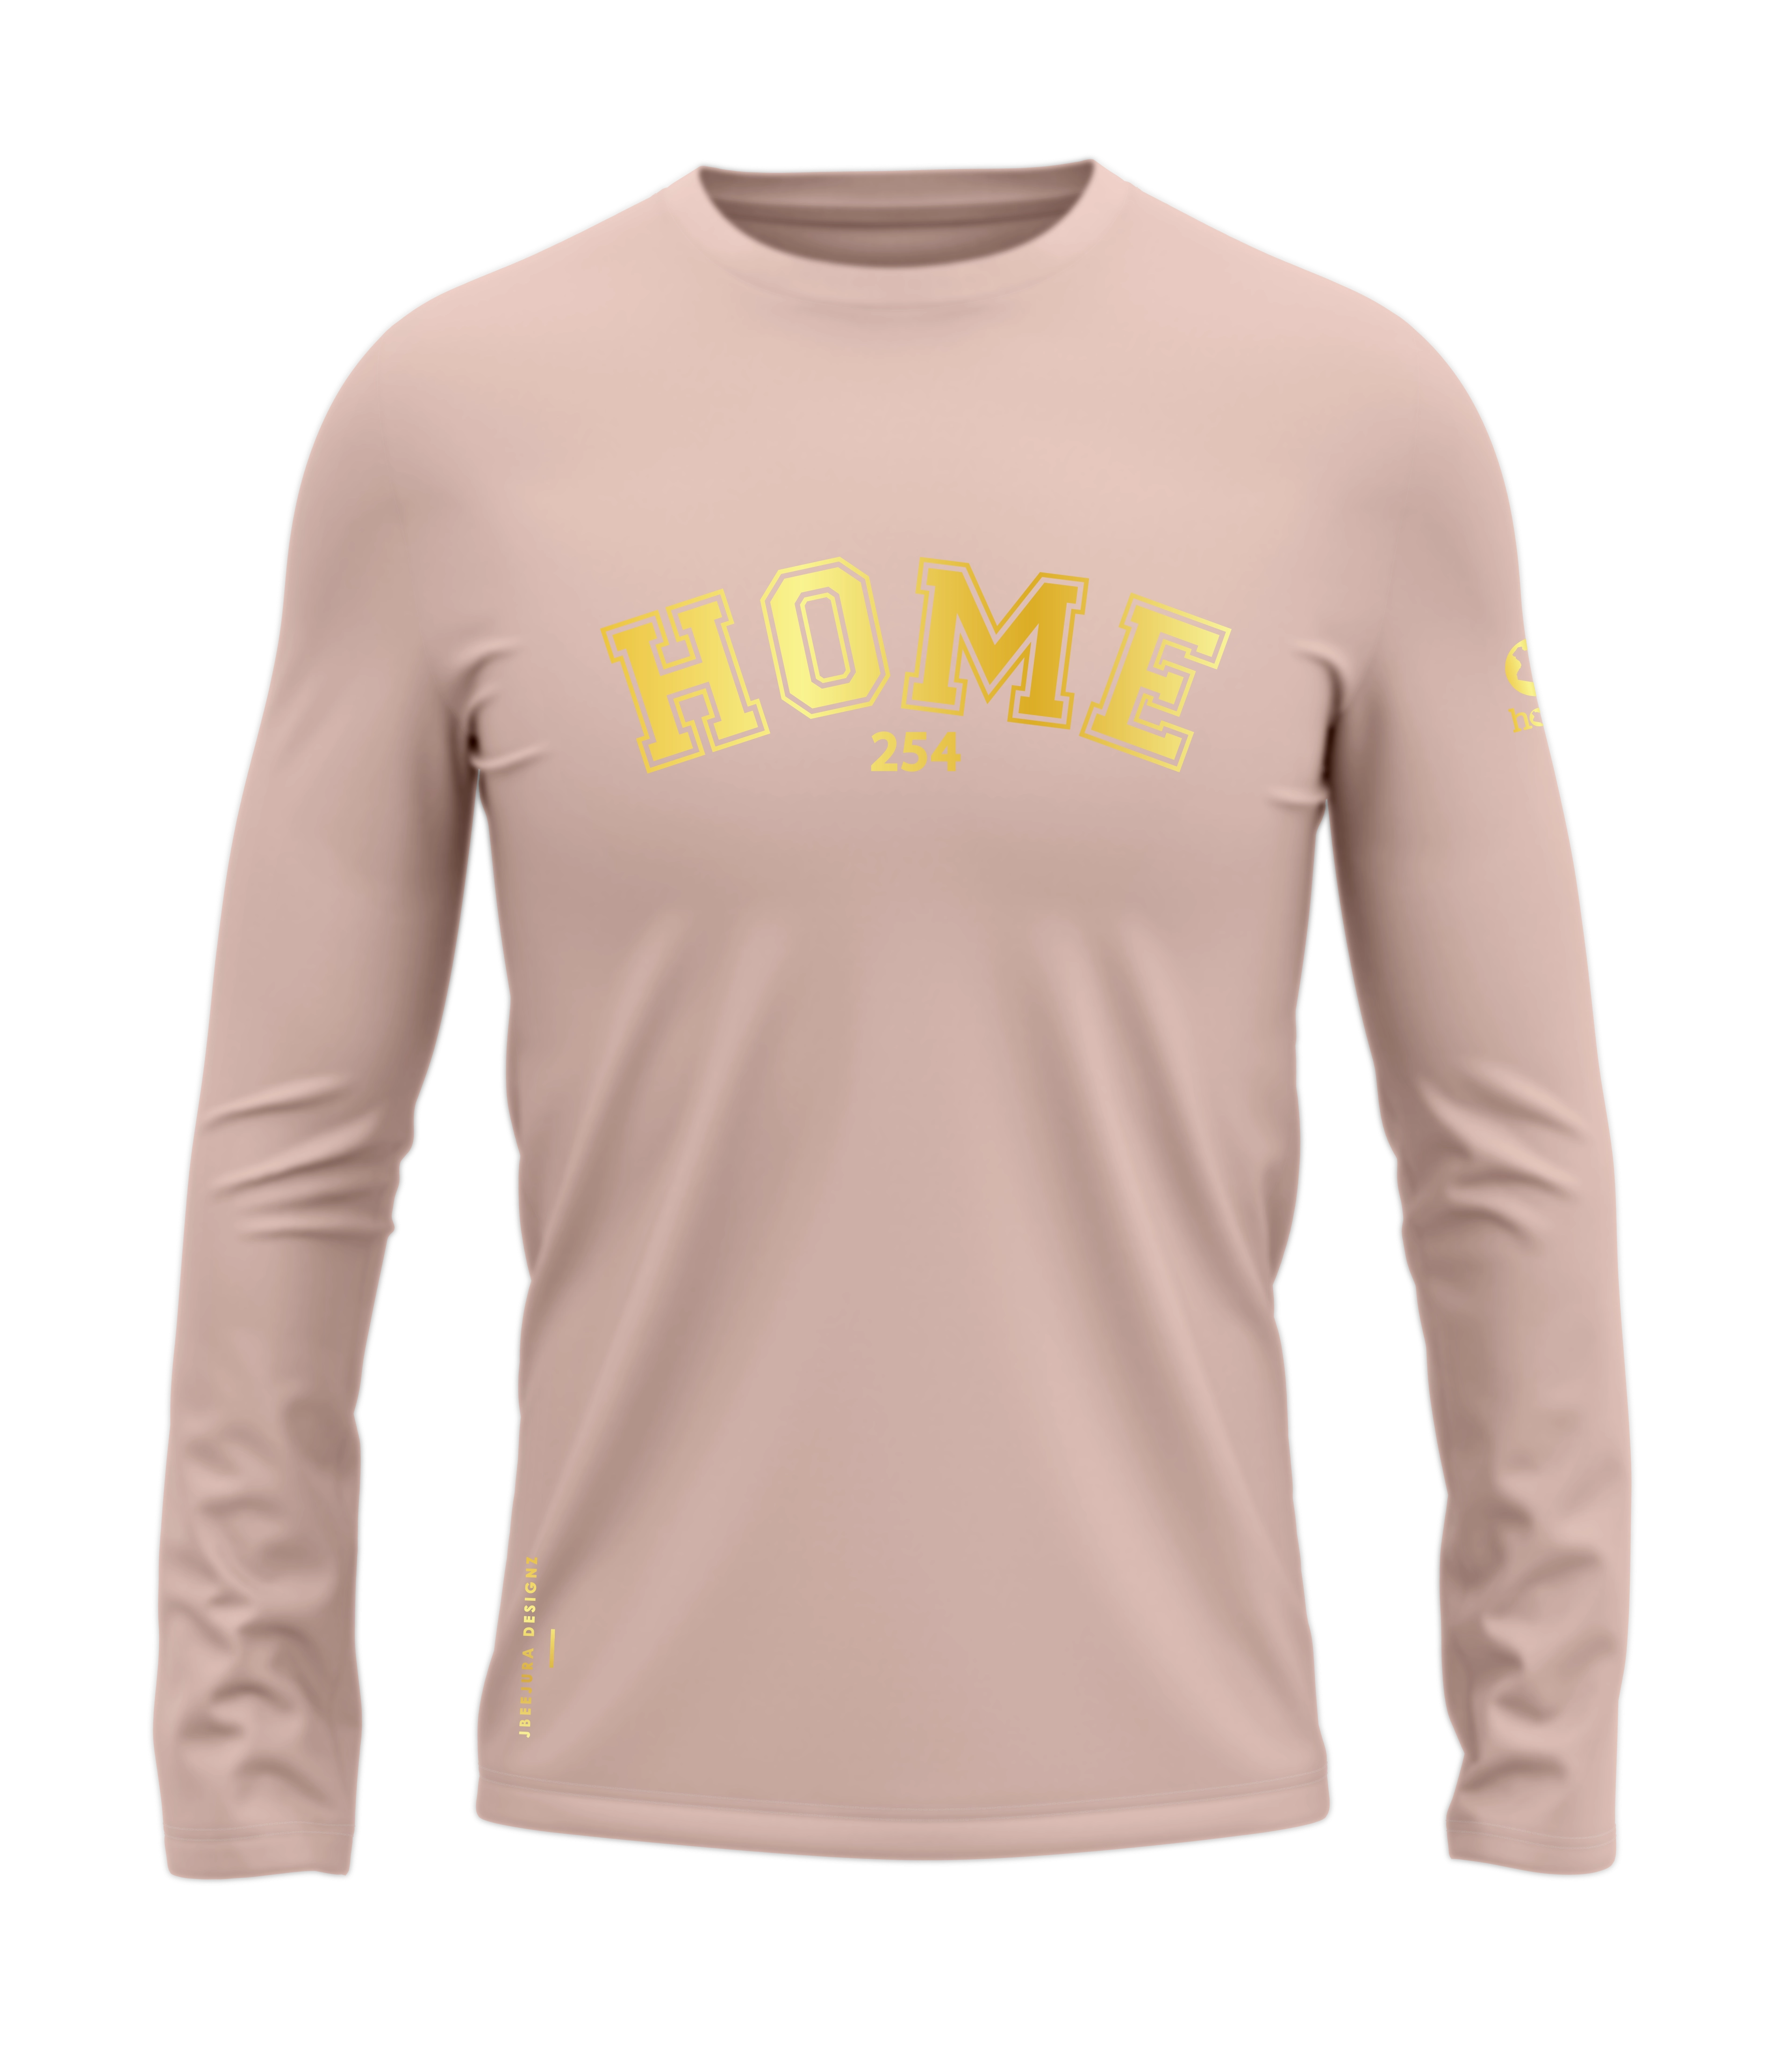 home_254 LONG-SLEEVED PEACH T-SHIRT WITH A GOLD COLLEGE PRINT – COTTON PLUS FABRIC